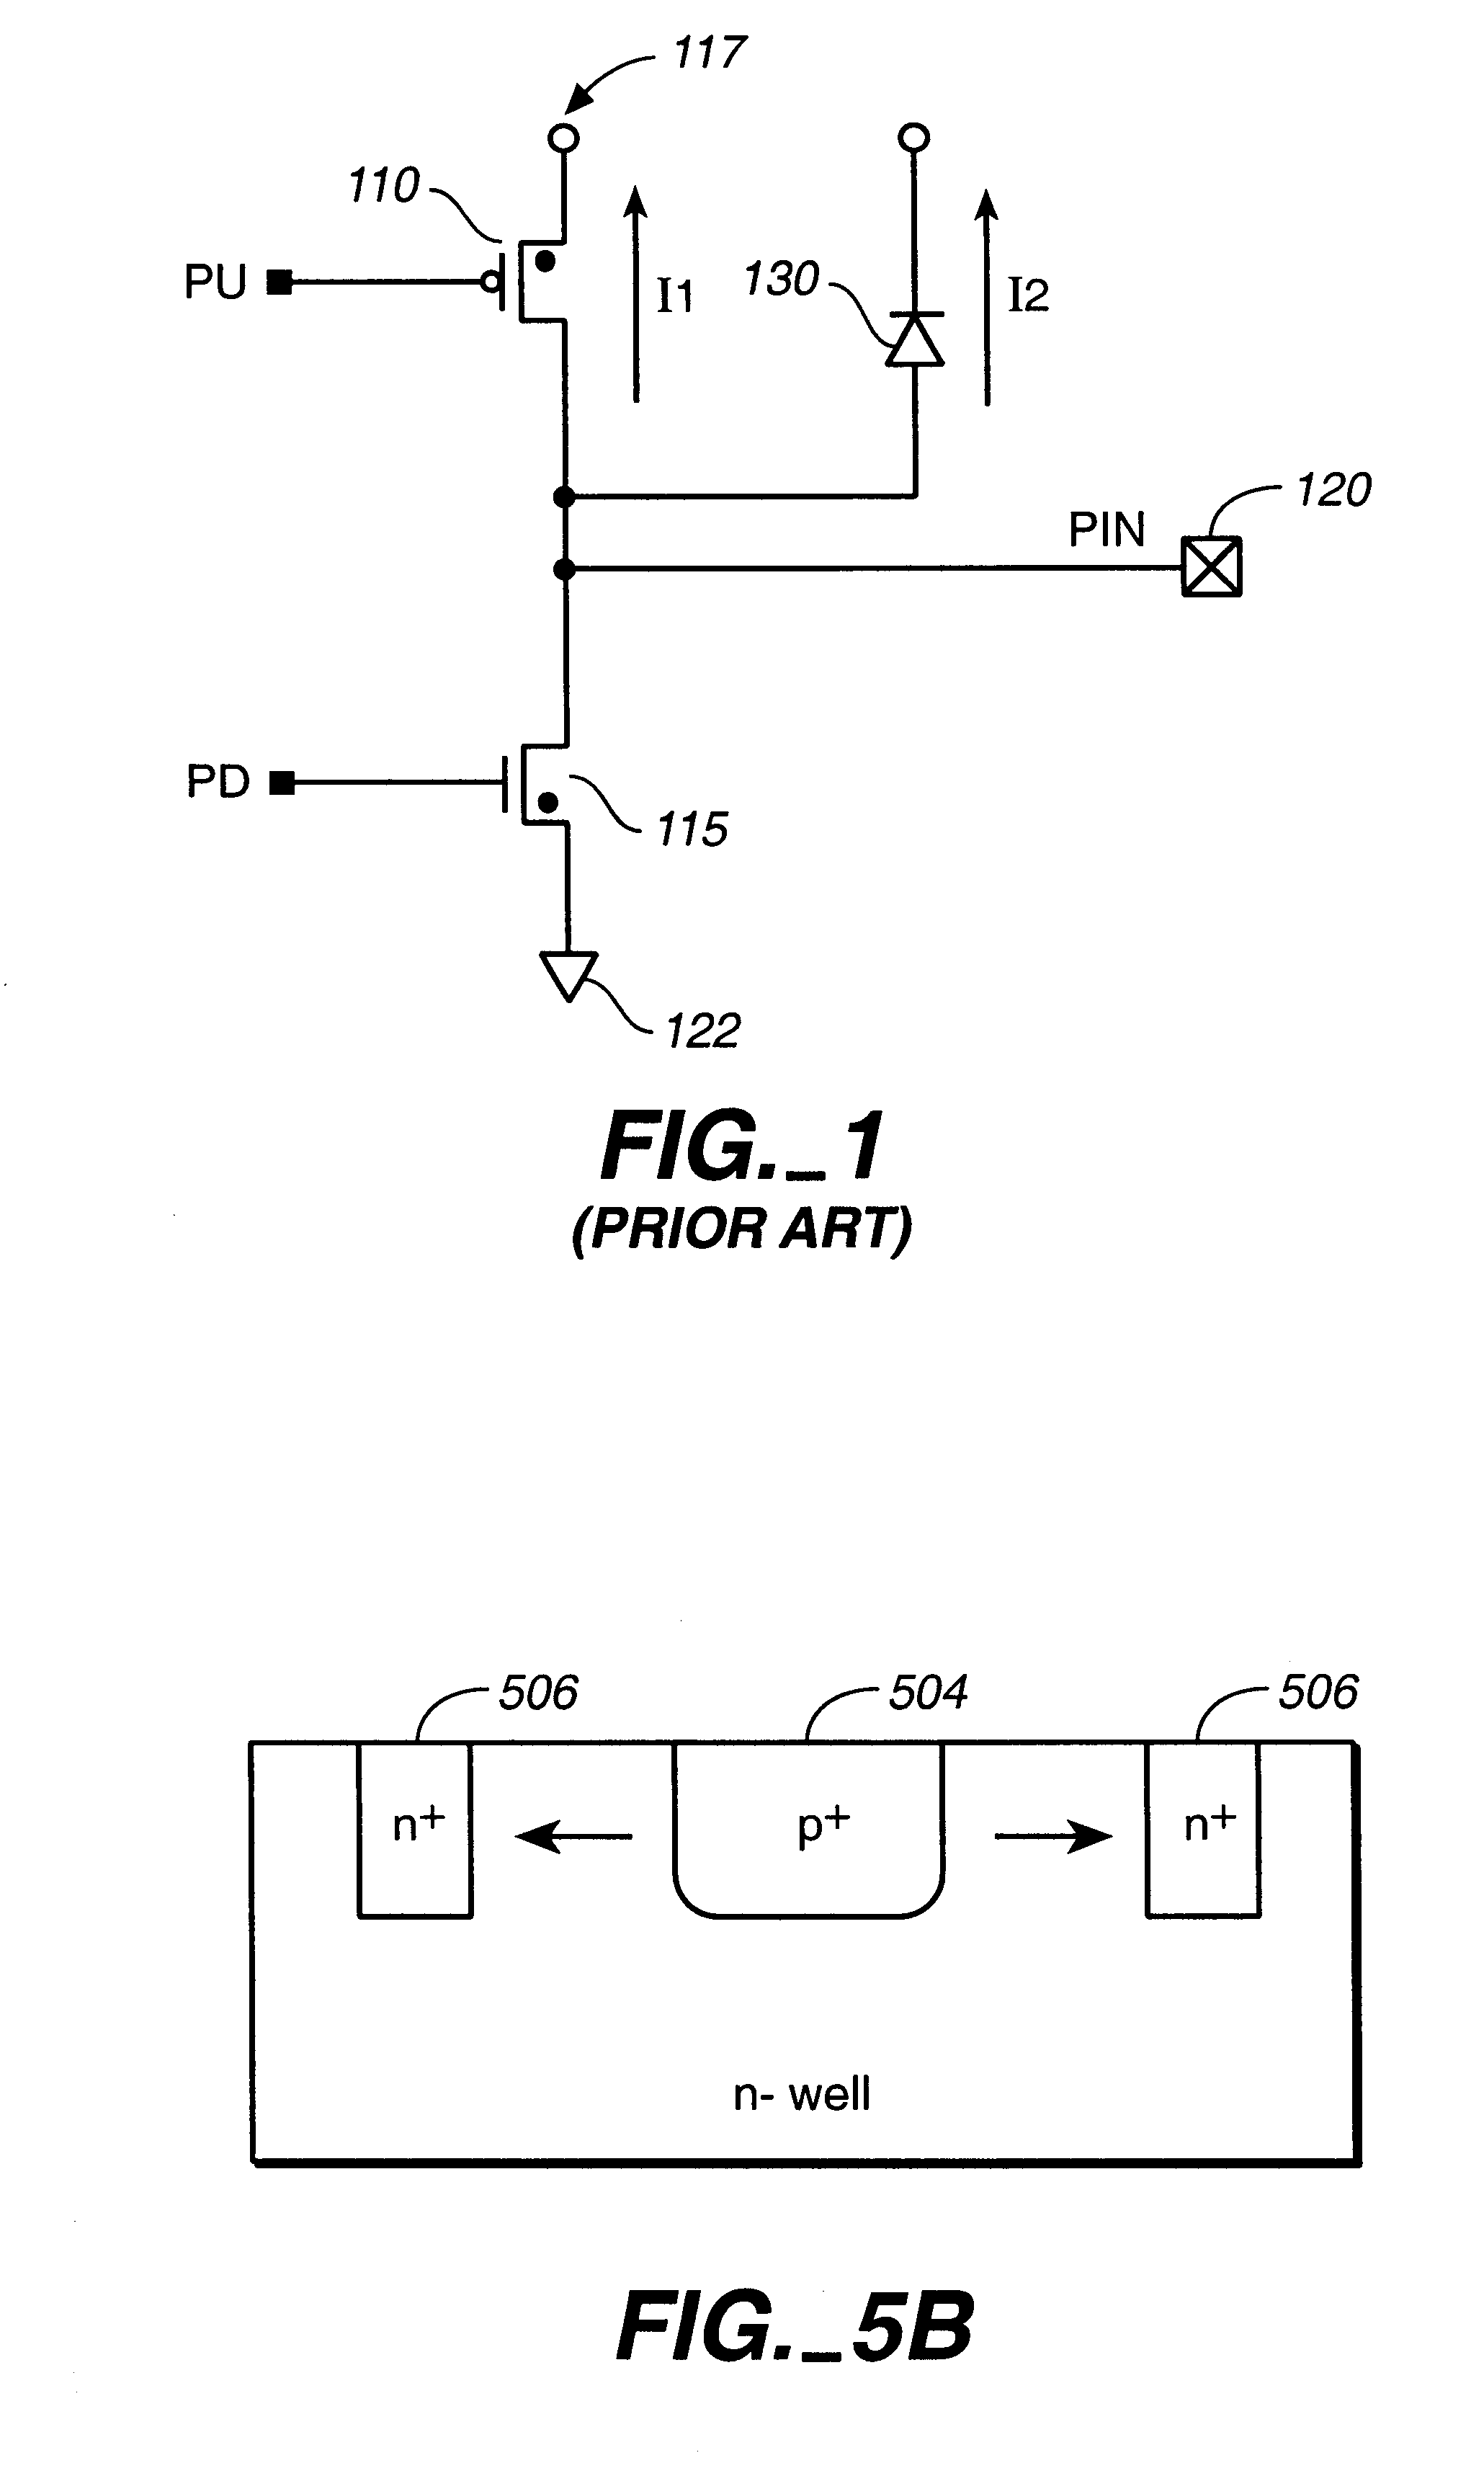 Integrated circuit with both clamp protection and high impedance protection from input overshoot